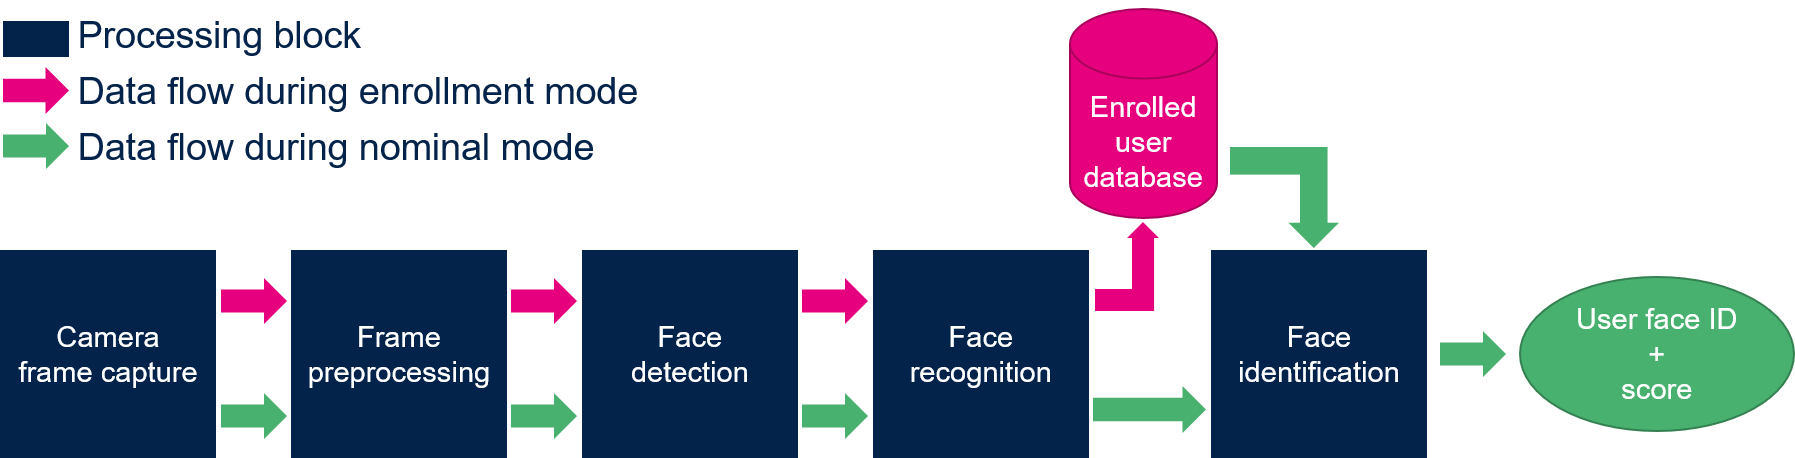 Data flow for the face recognition application.